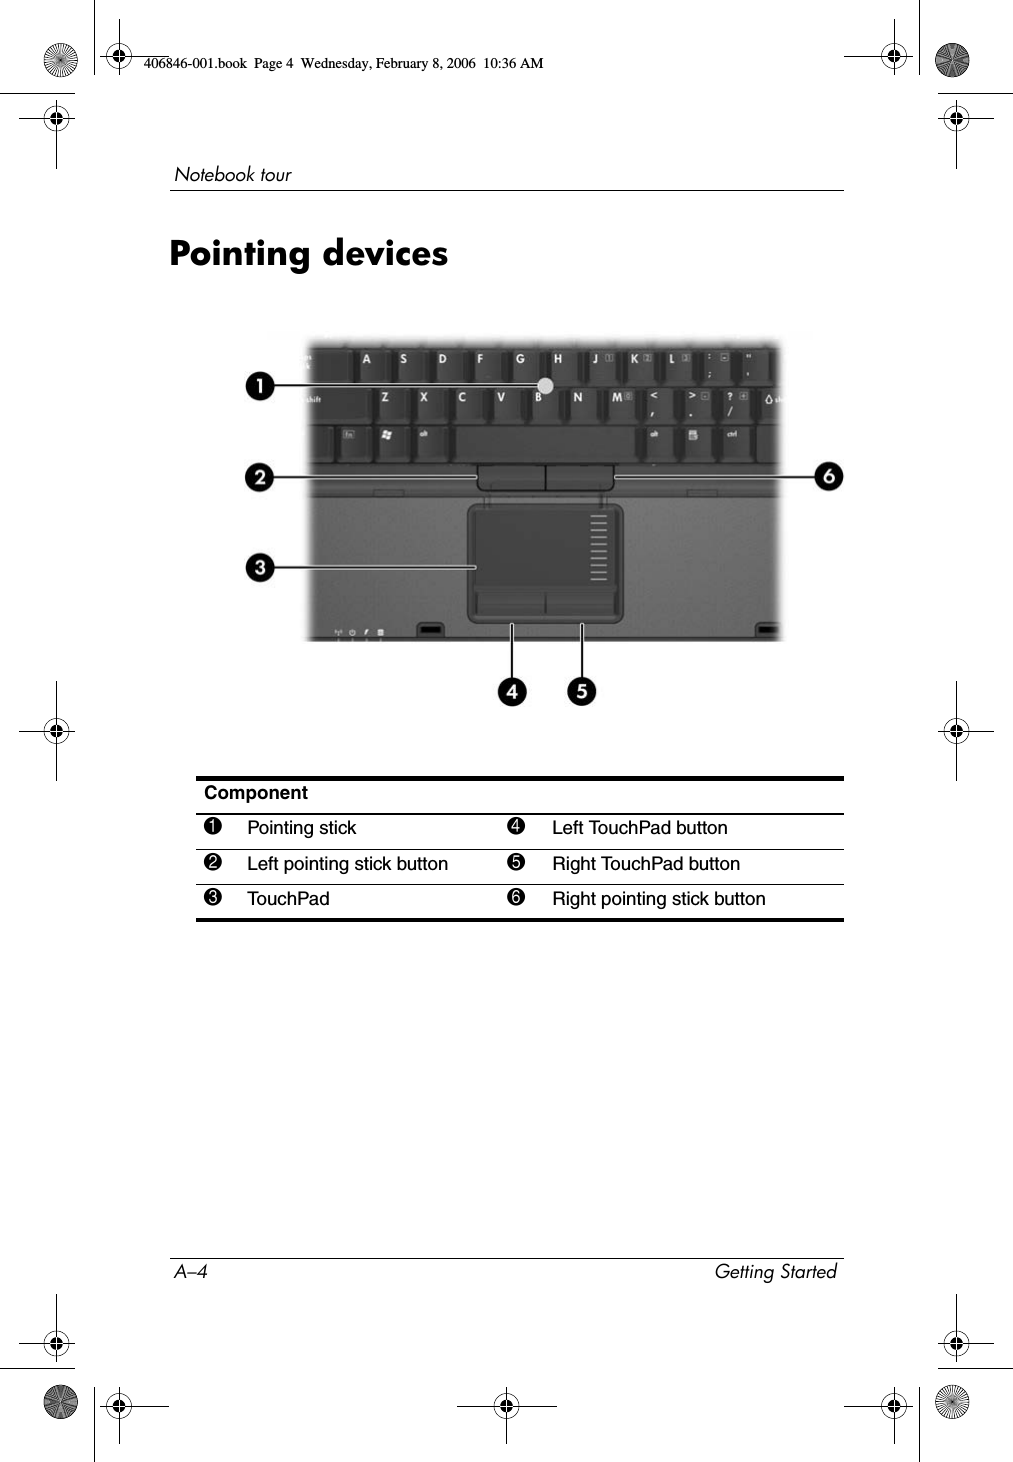 A–4 Getting StartedNotebook tourPointing devicesComponent1Pointing stick 4Left TouchPad button2Left pointing stick button 5Right TouchPad button3TouchPad 6Right pointing stick button406846-001.book  Page 4  Wednesday, February 8, 2006  10:36 AM